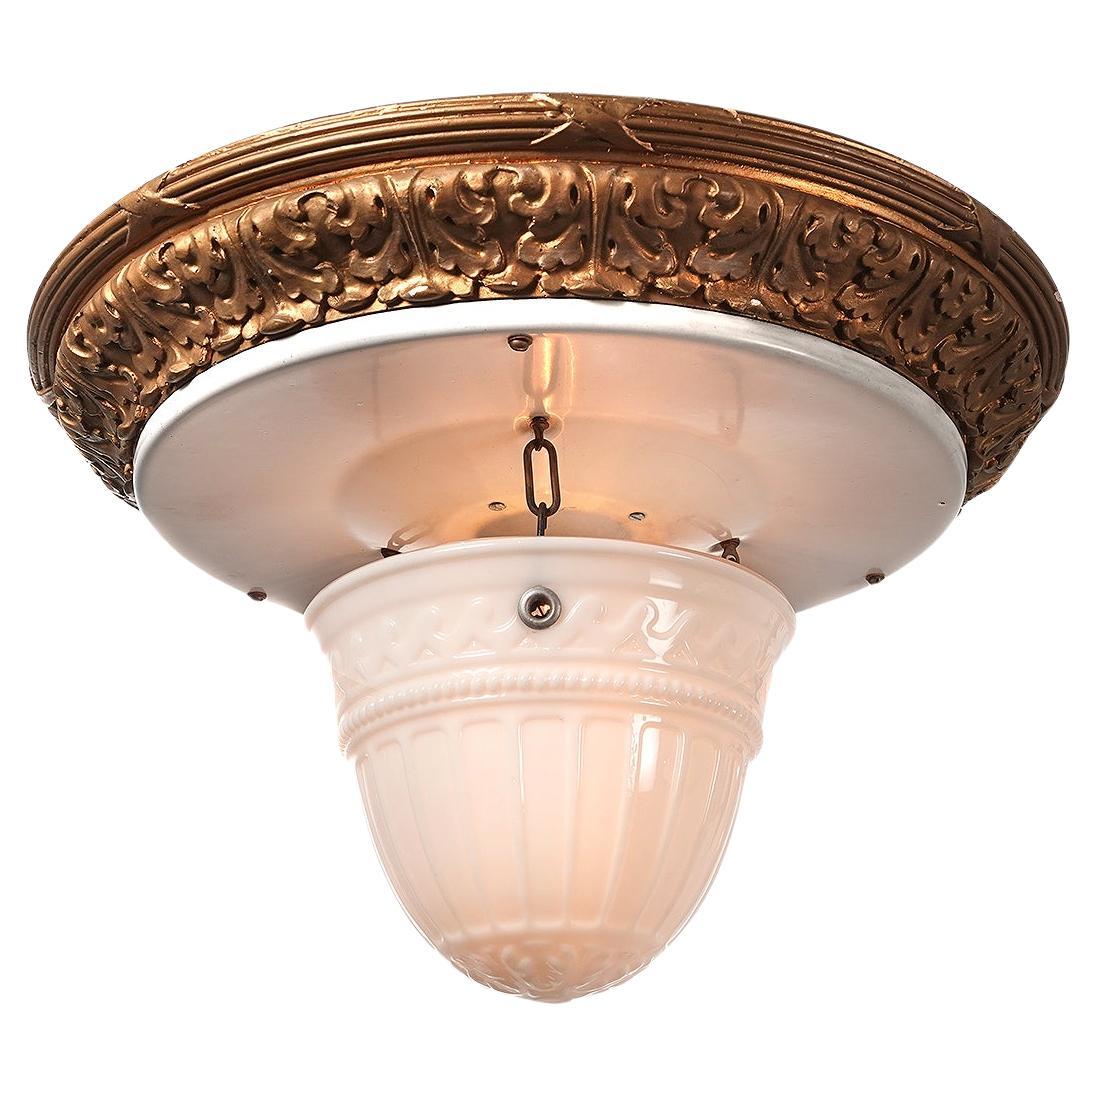 Reflectolyte flush mount fixtures have always been popular because of their unique look. The glass dome has a fluted pattern that simply hangs from 3 hooks making it easy to clean and change bulbs.. The ceiling crown is white porcelain over steel